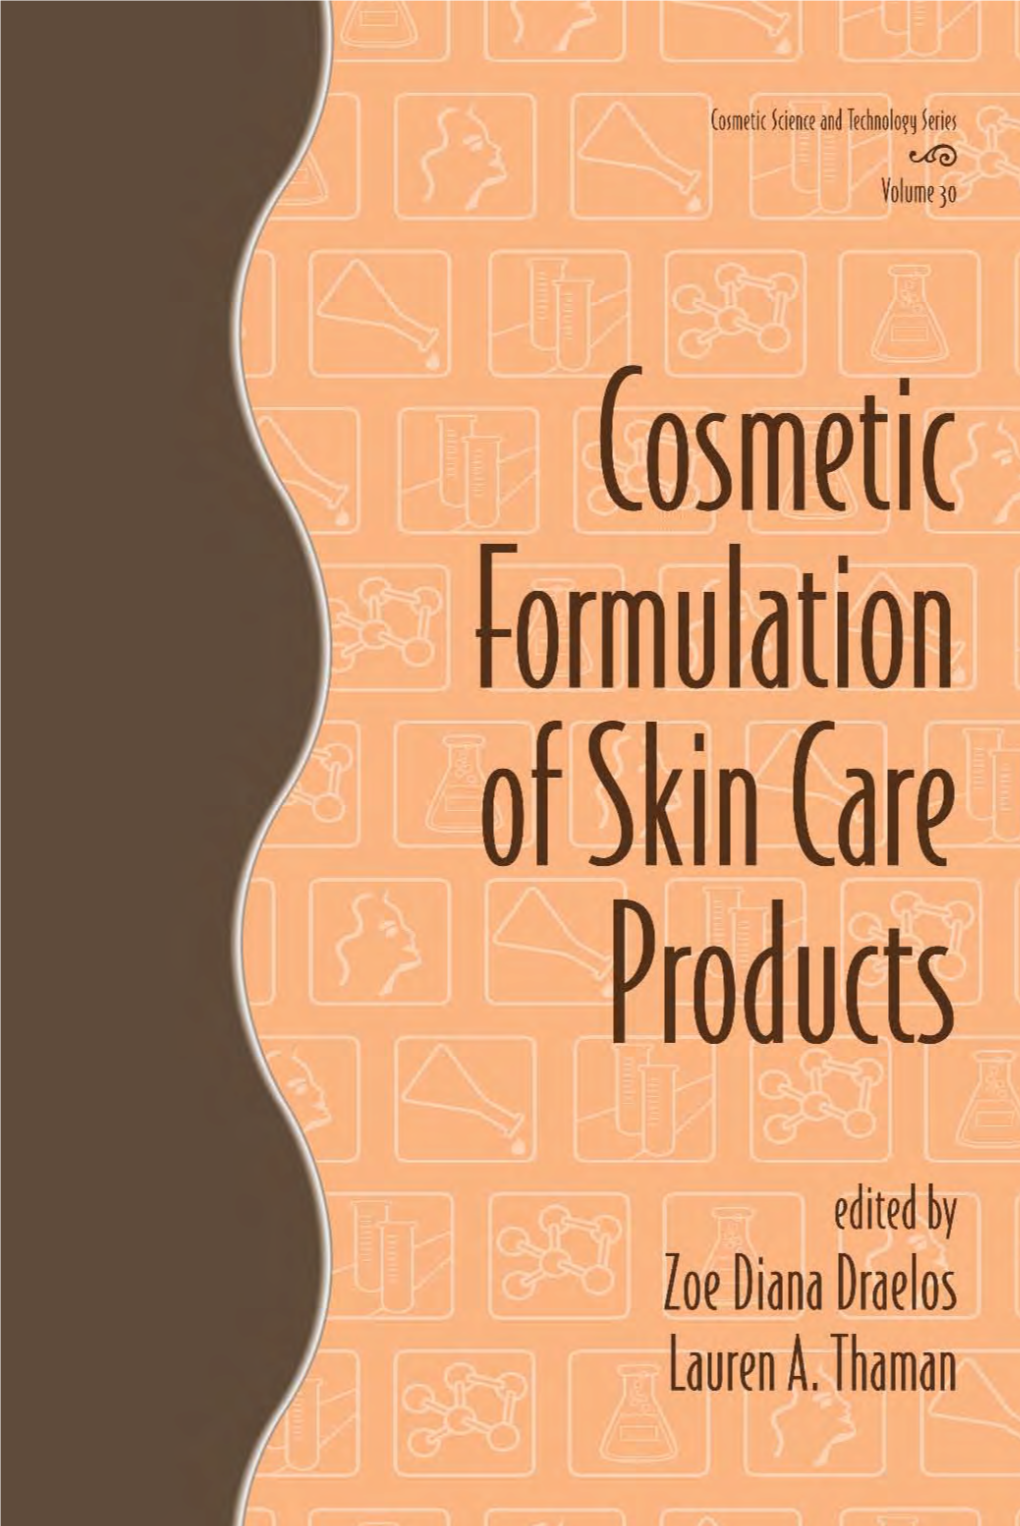 Cosmetic Formulation of Skin Care Products DK9685 Half-Series-Title 4/25/06 4:34 PM Page B